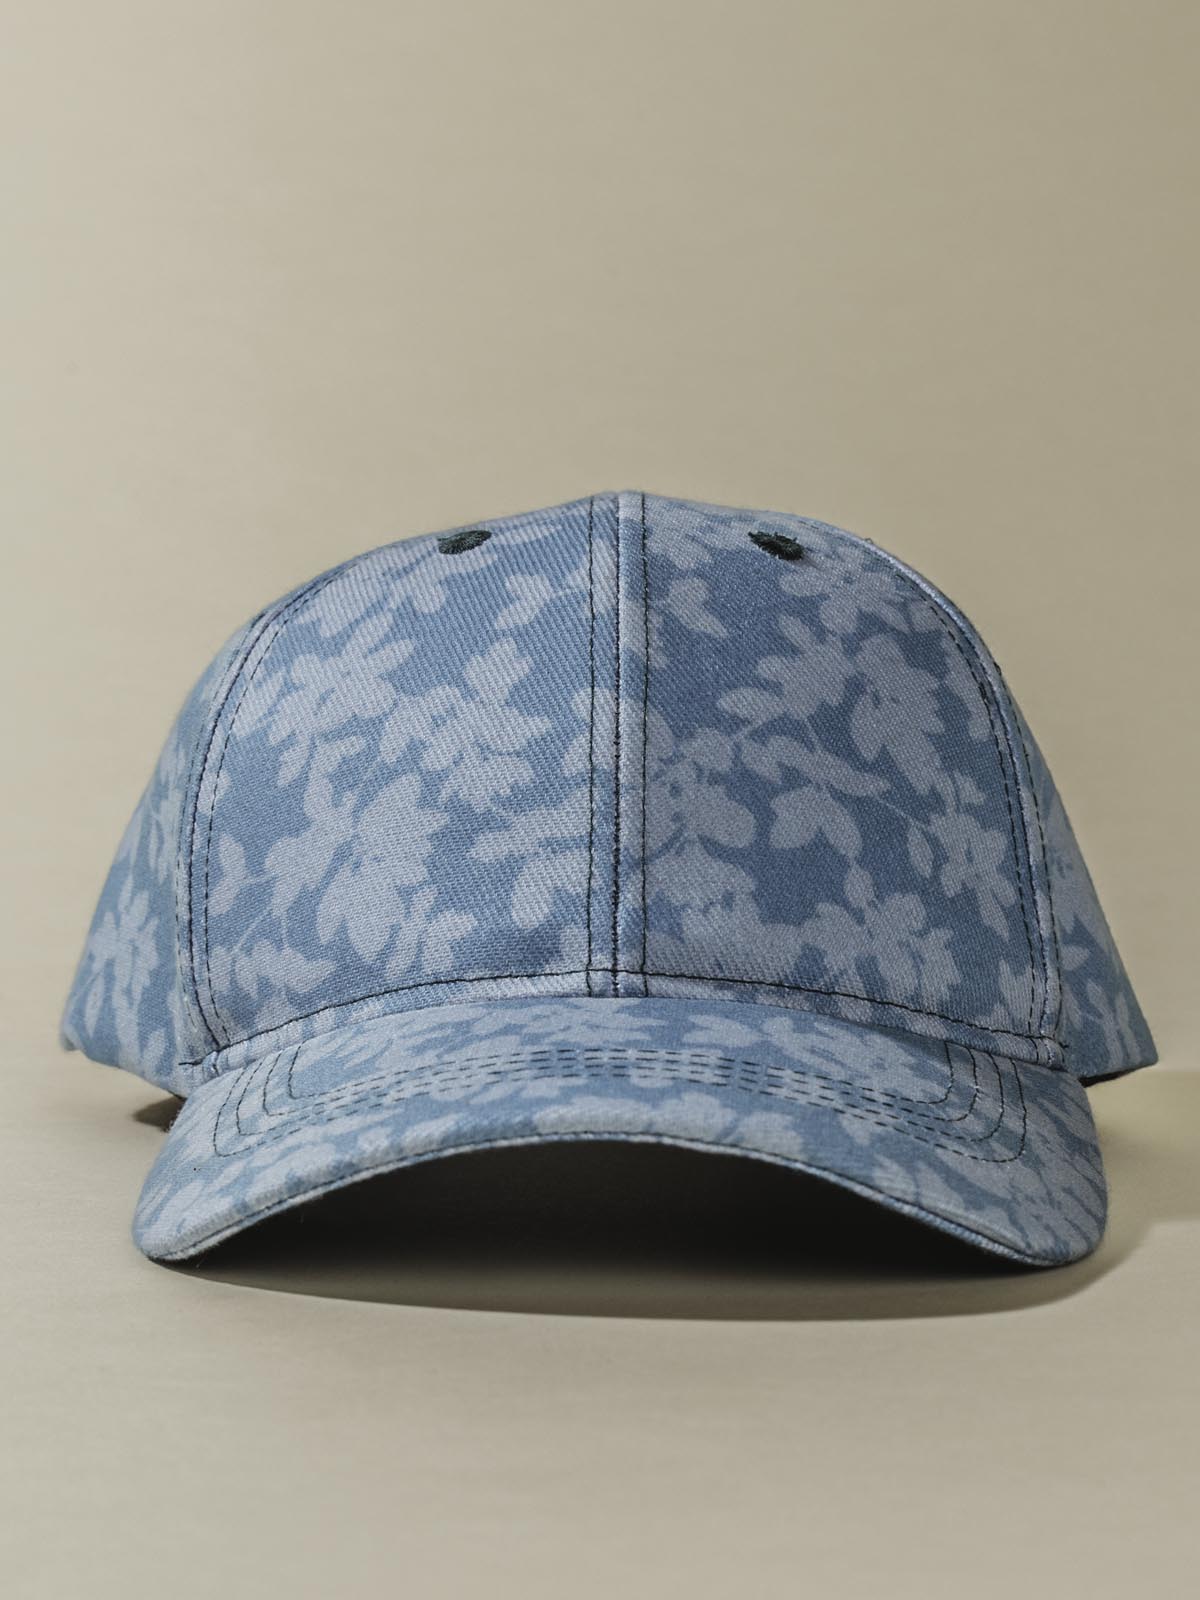 Front of teal Hat with light floral design on tan background.